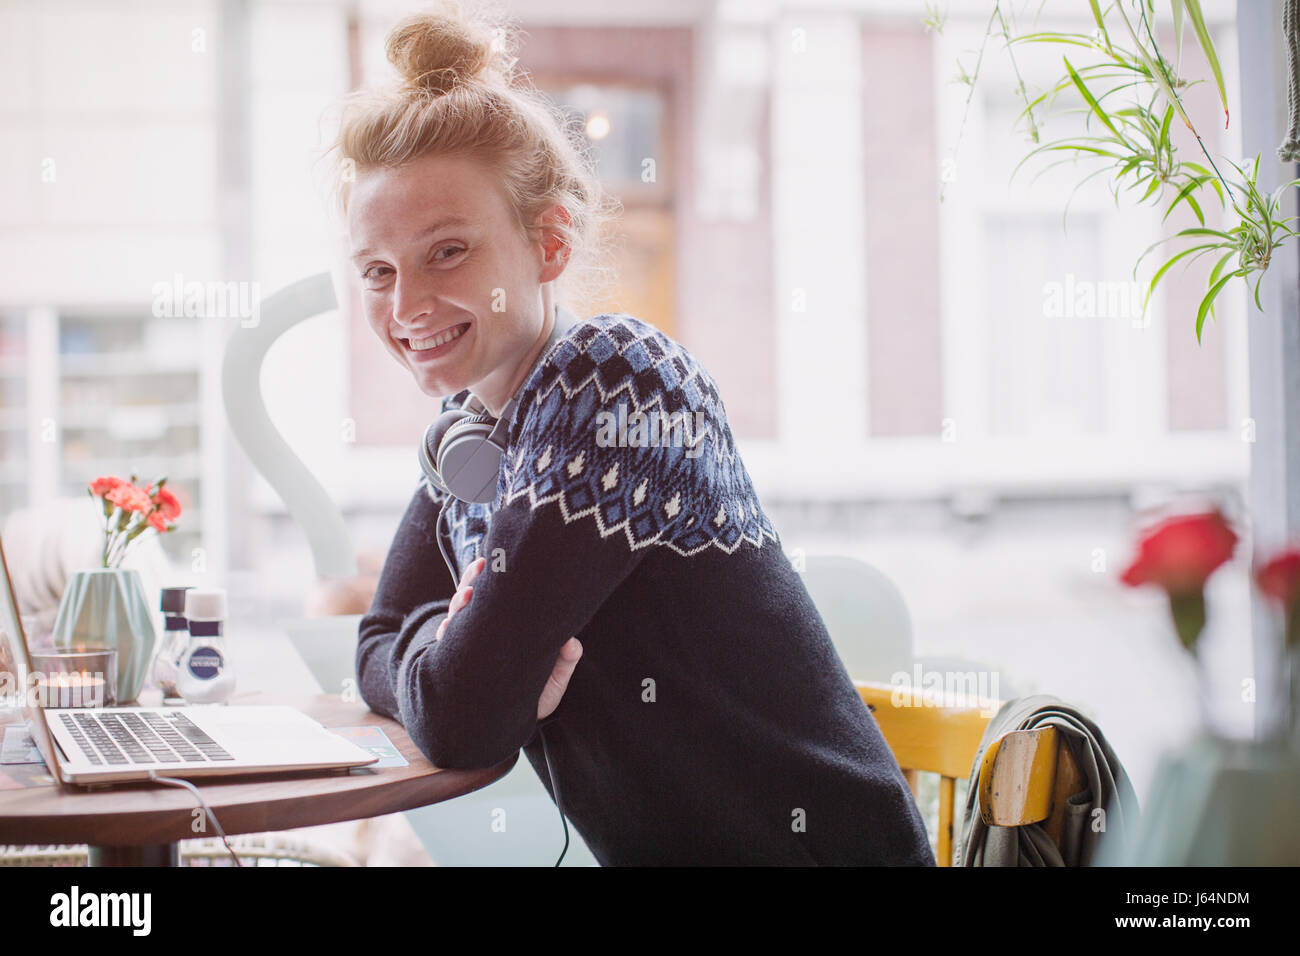 Portrait smiling young woman with headphones at laptop in cafe window Stock Photo